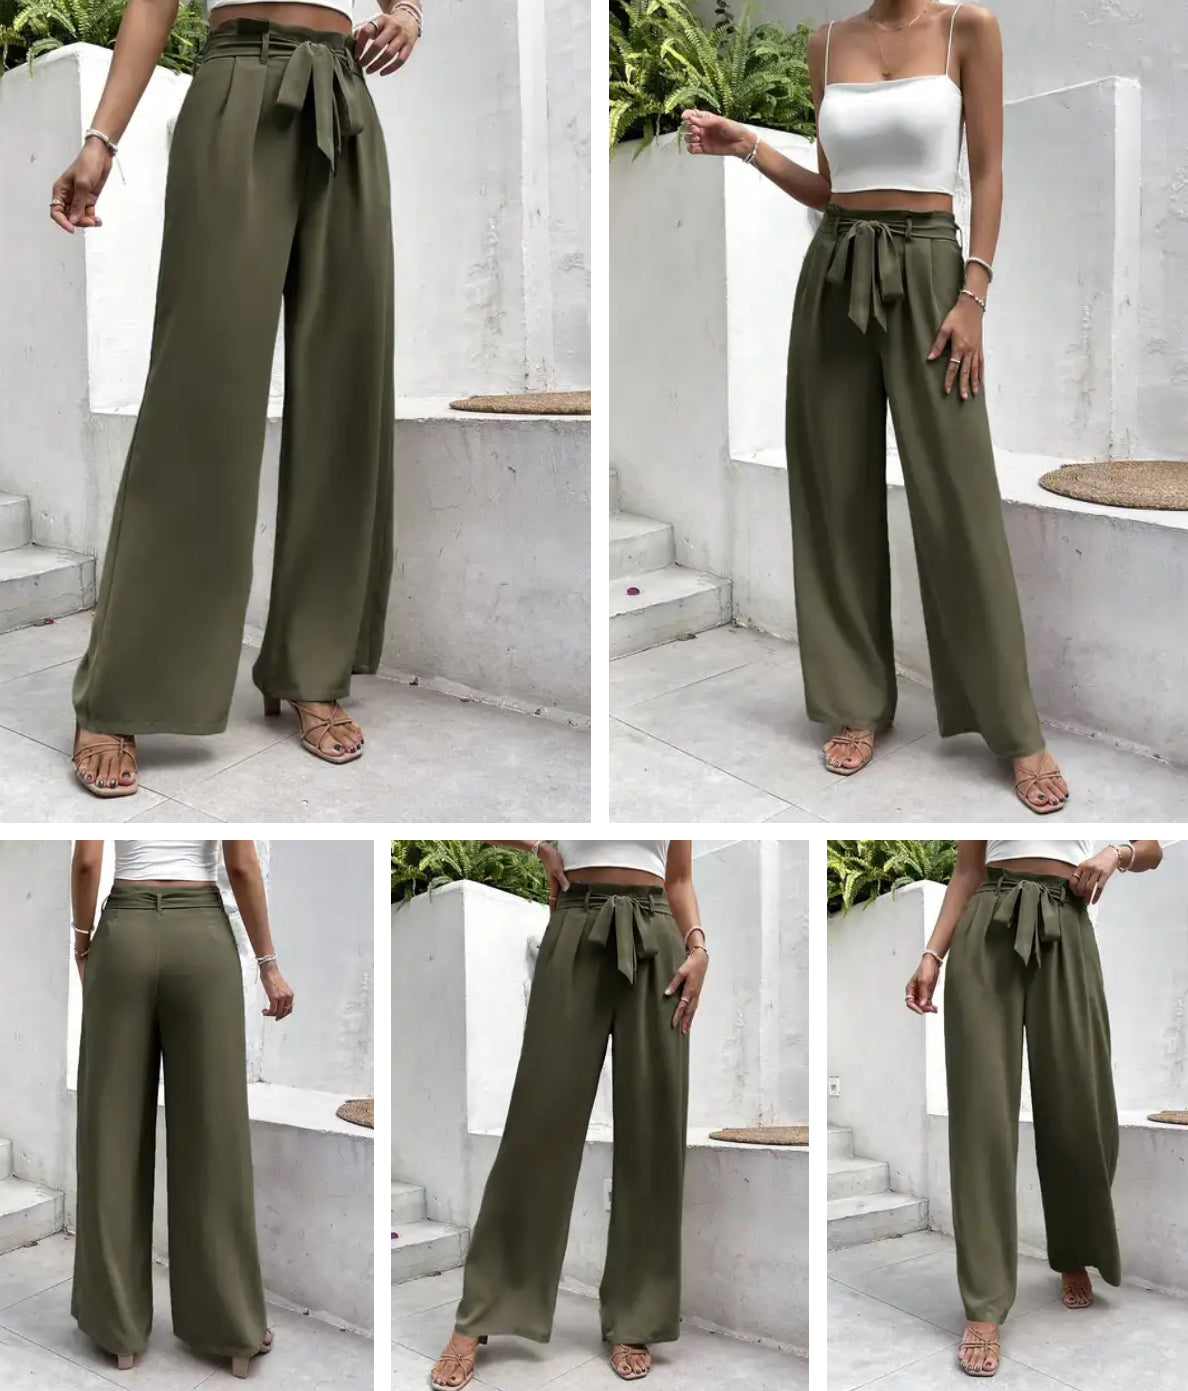 Bow Tie Frenchy Waist Belted Wide Leg Pants, Six Colors, US Sizes 2 - 20